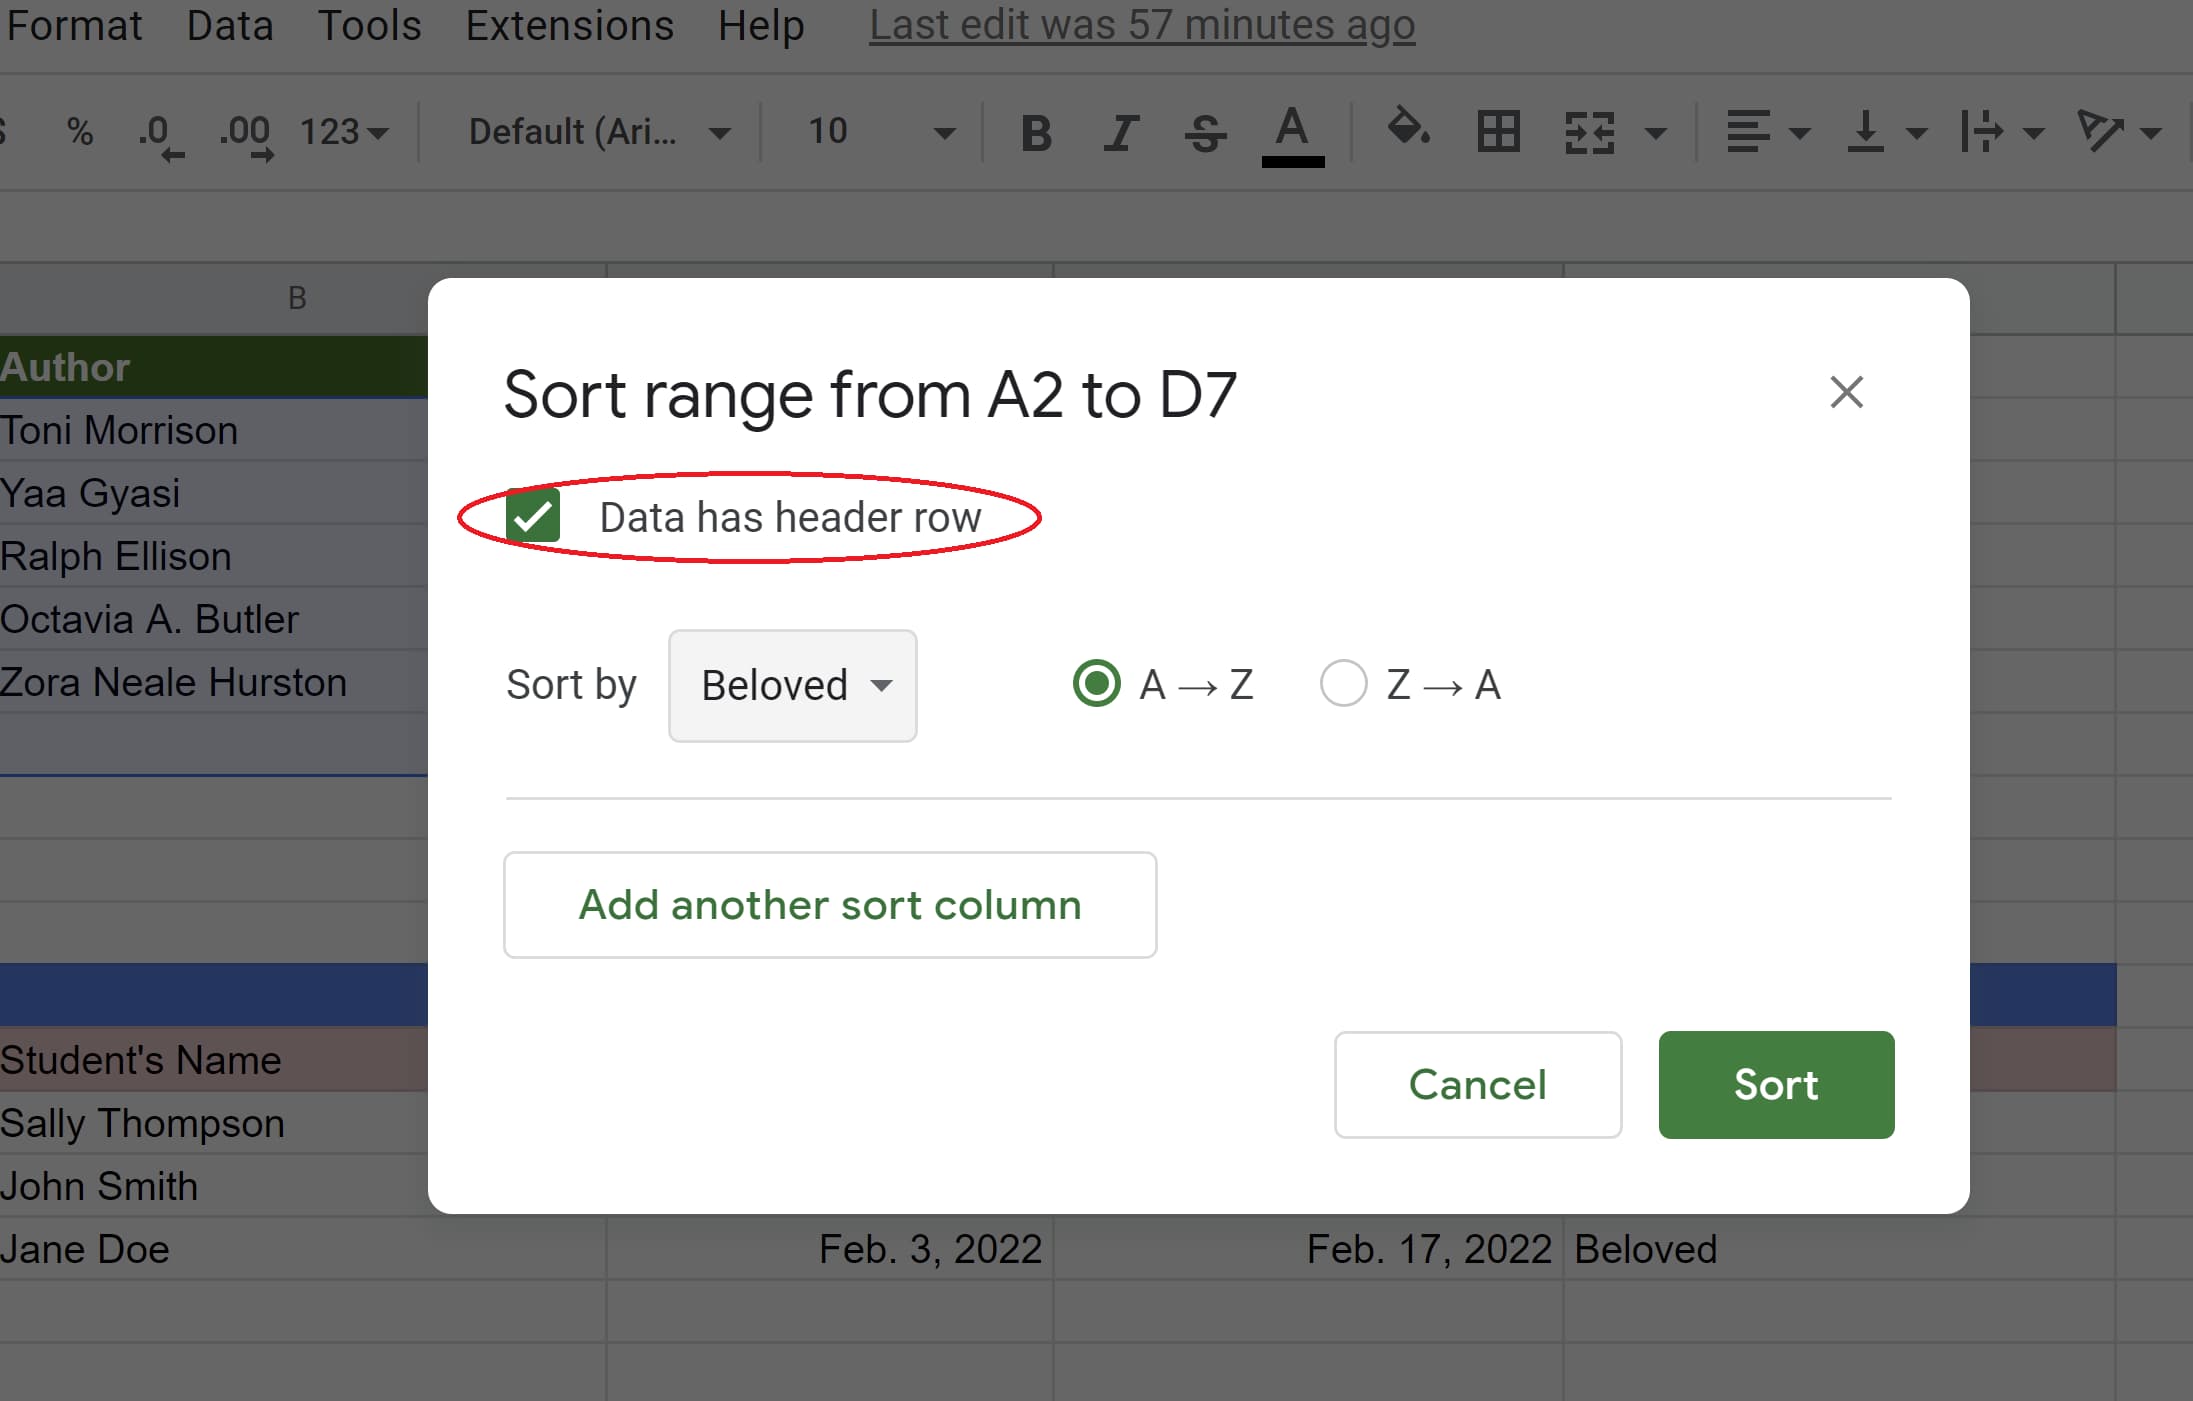 The data has the header row option selected in Google Spreadsheets